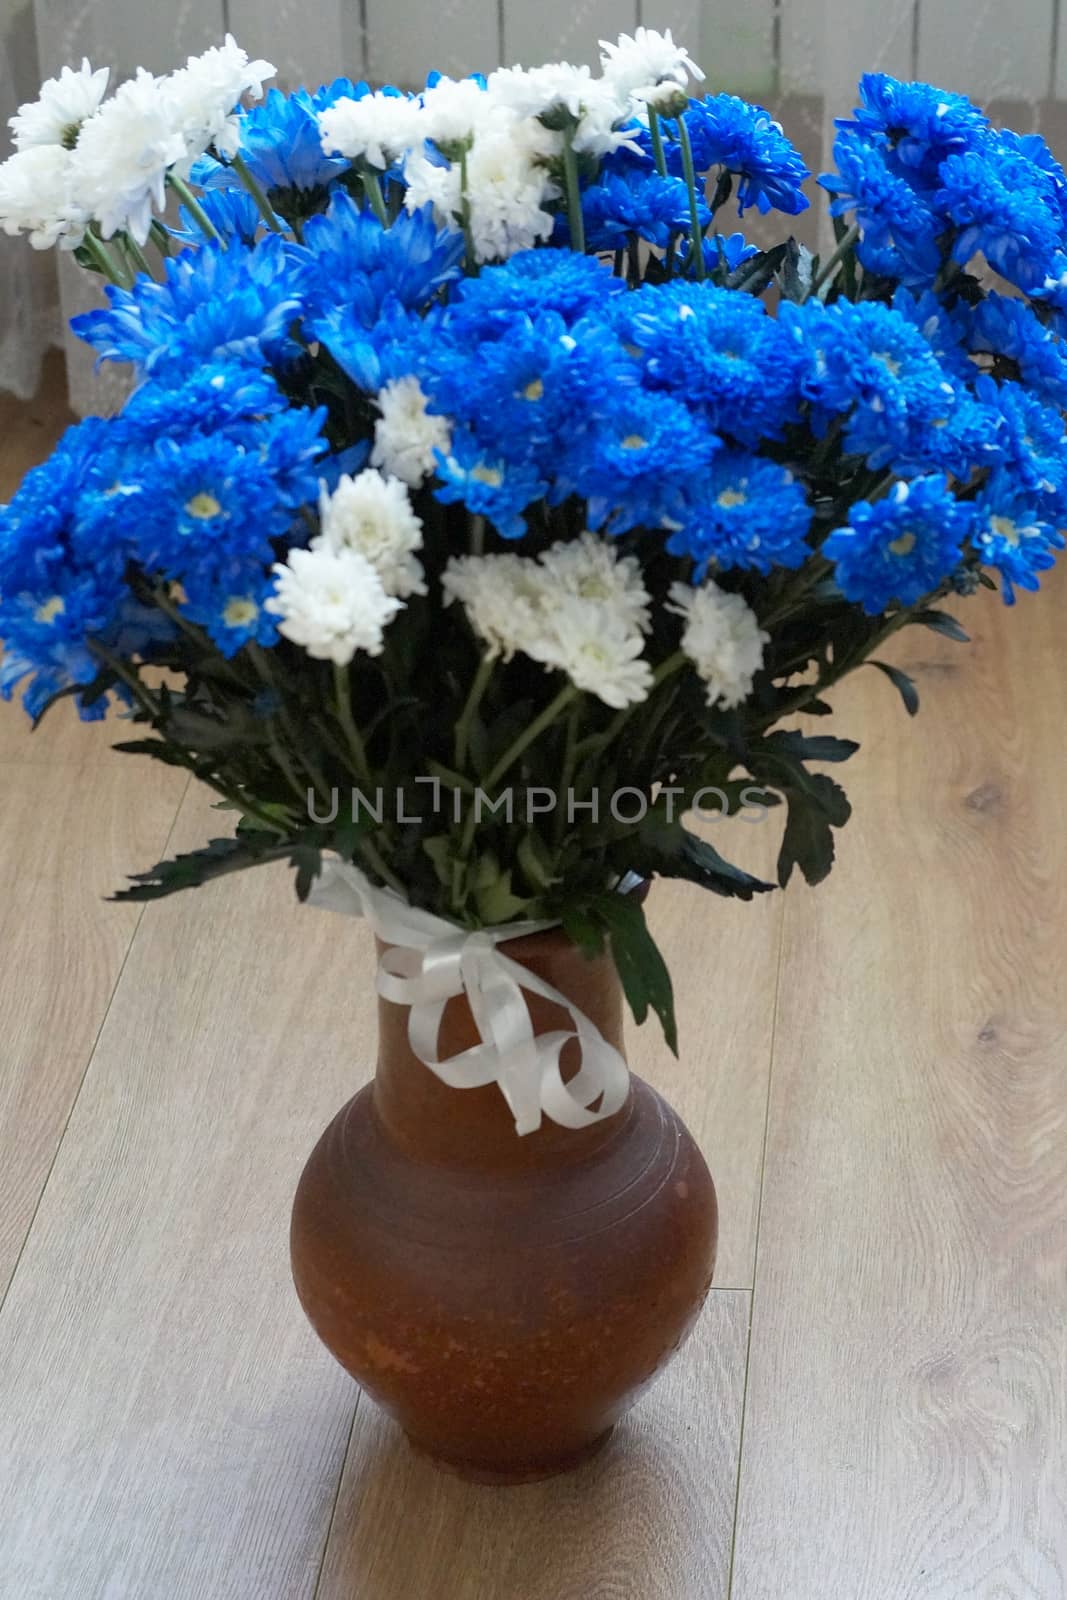 a bouquet of blue and white chrysanthemums in a clay vase on the wooden floor